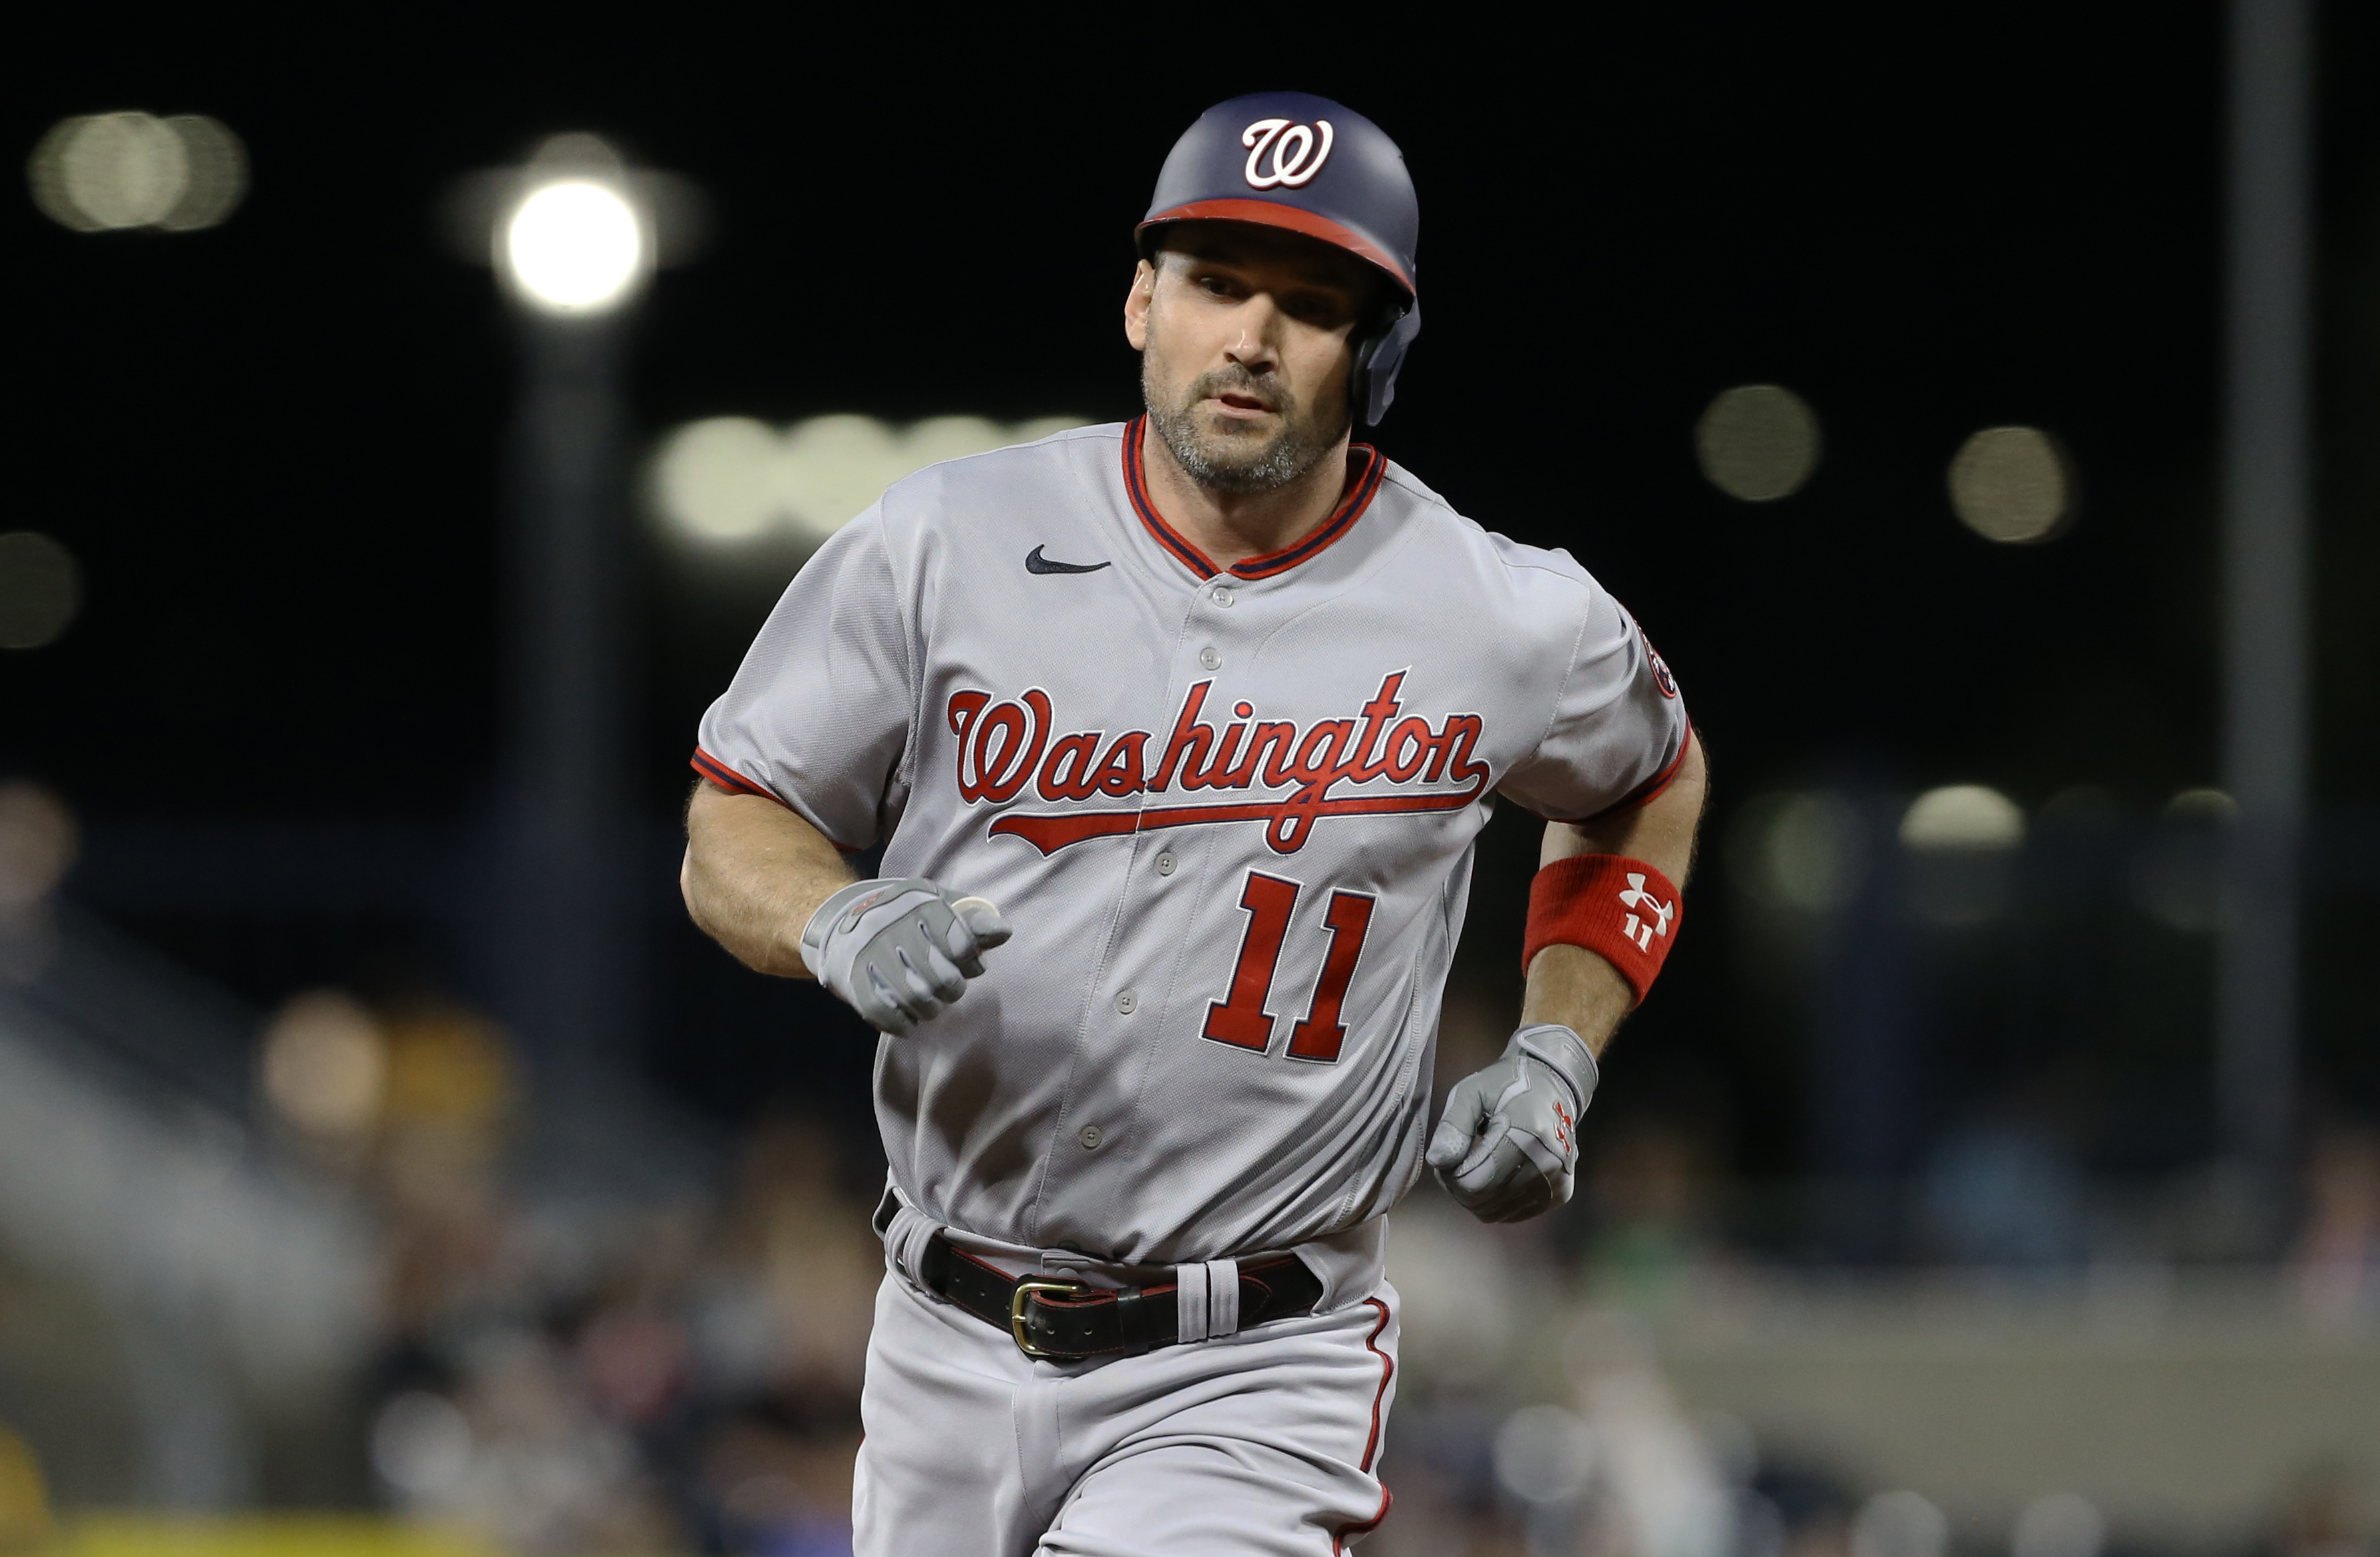 Ryan Zimmerman Speaking Fee and Booking Agent Contact